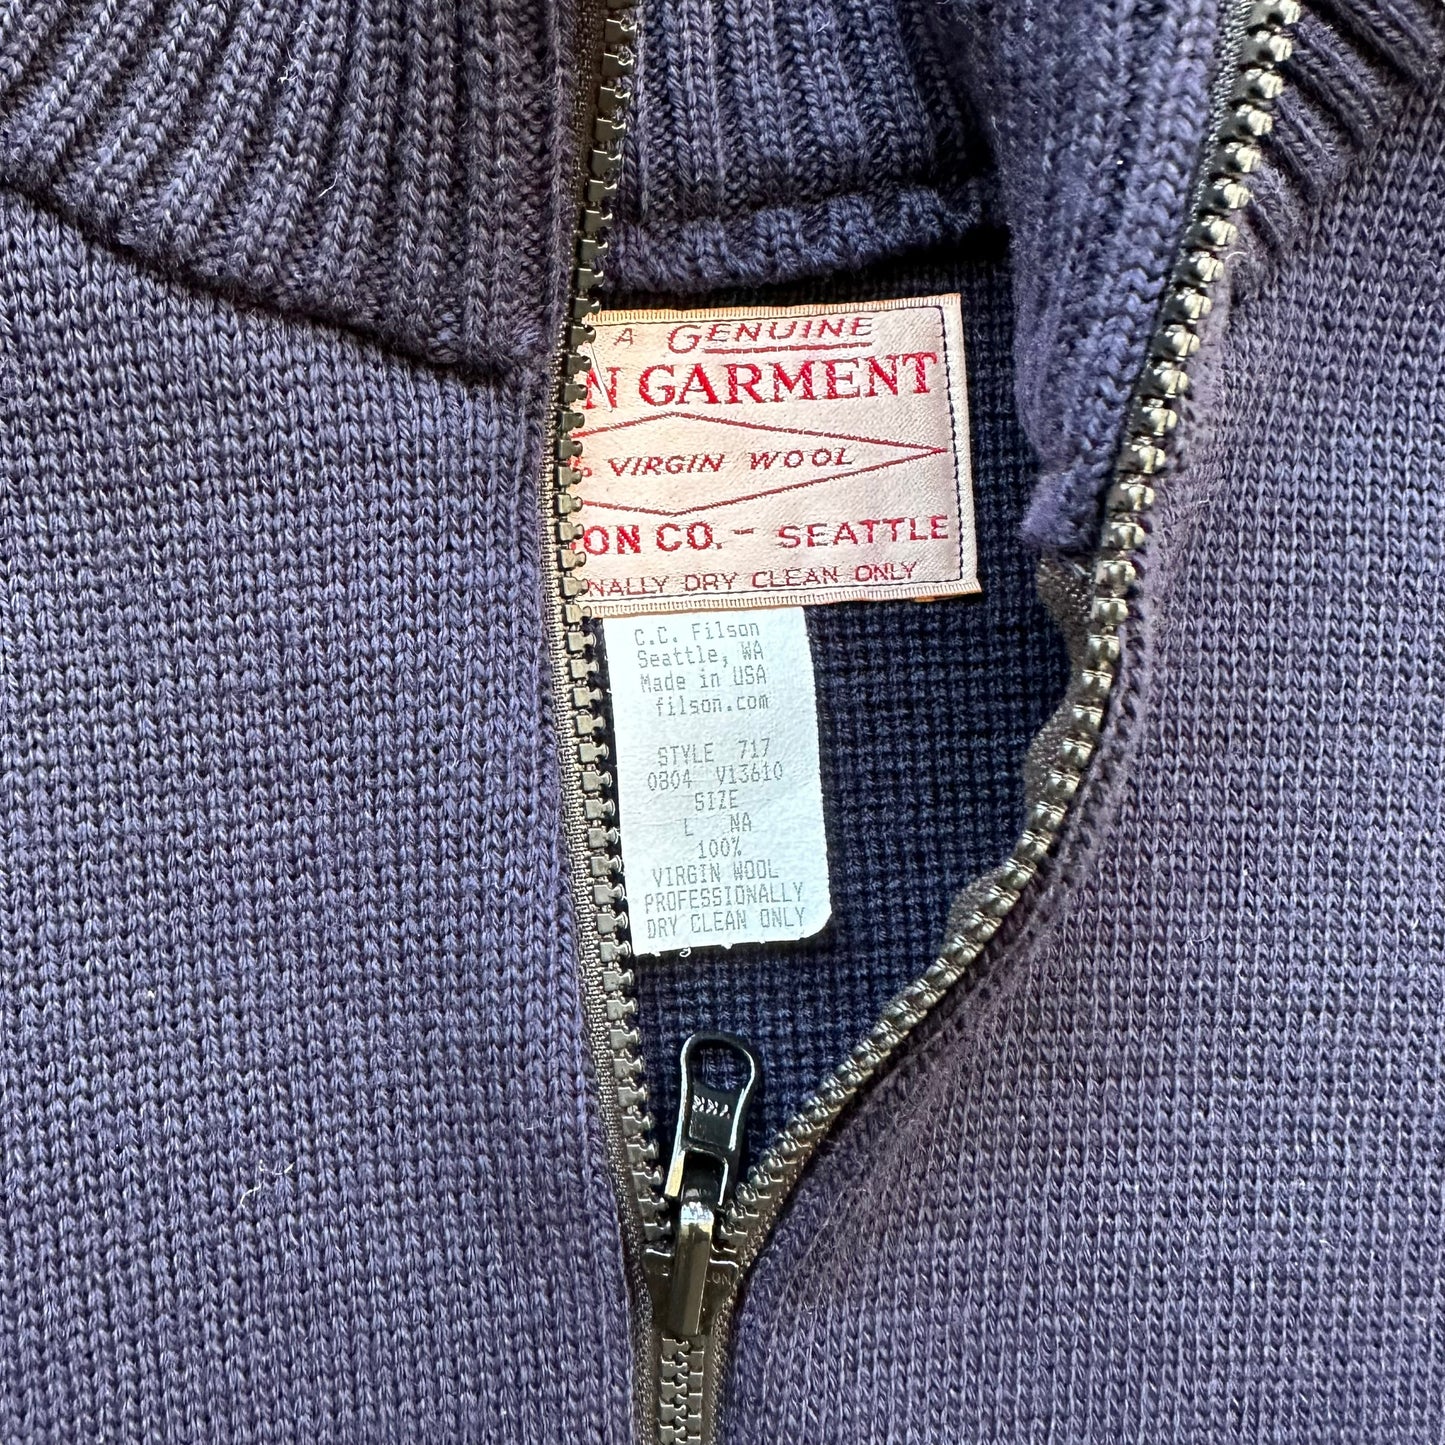 Tag View of Filson Style 717 Navy Blue Zip Up Cardigan SZ L |  Barn Owl Vintage Goods | Vintage Workwear Seattle